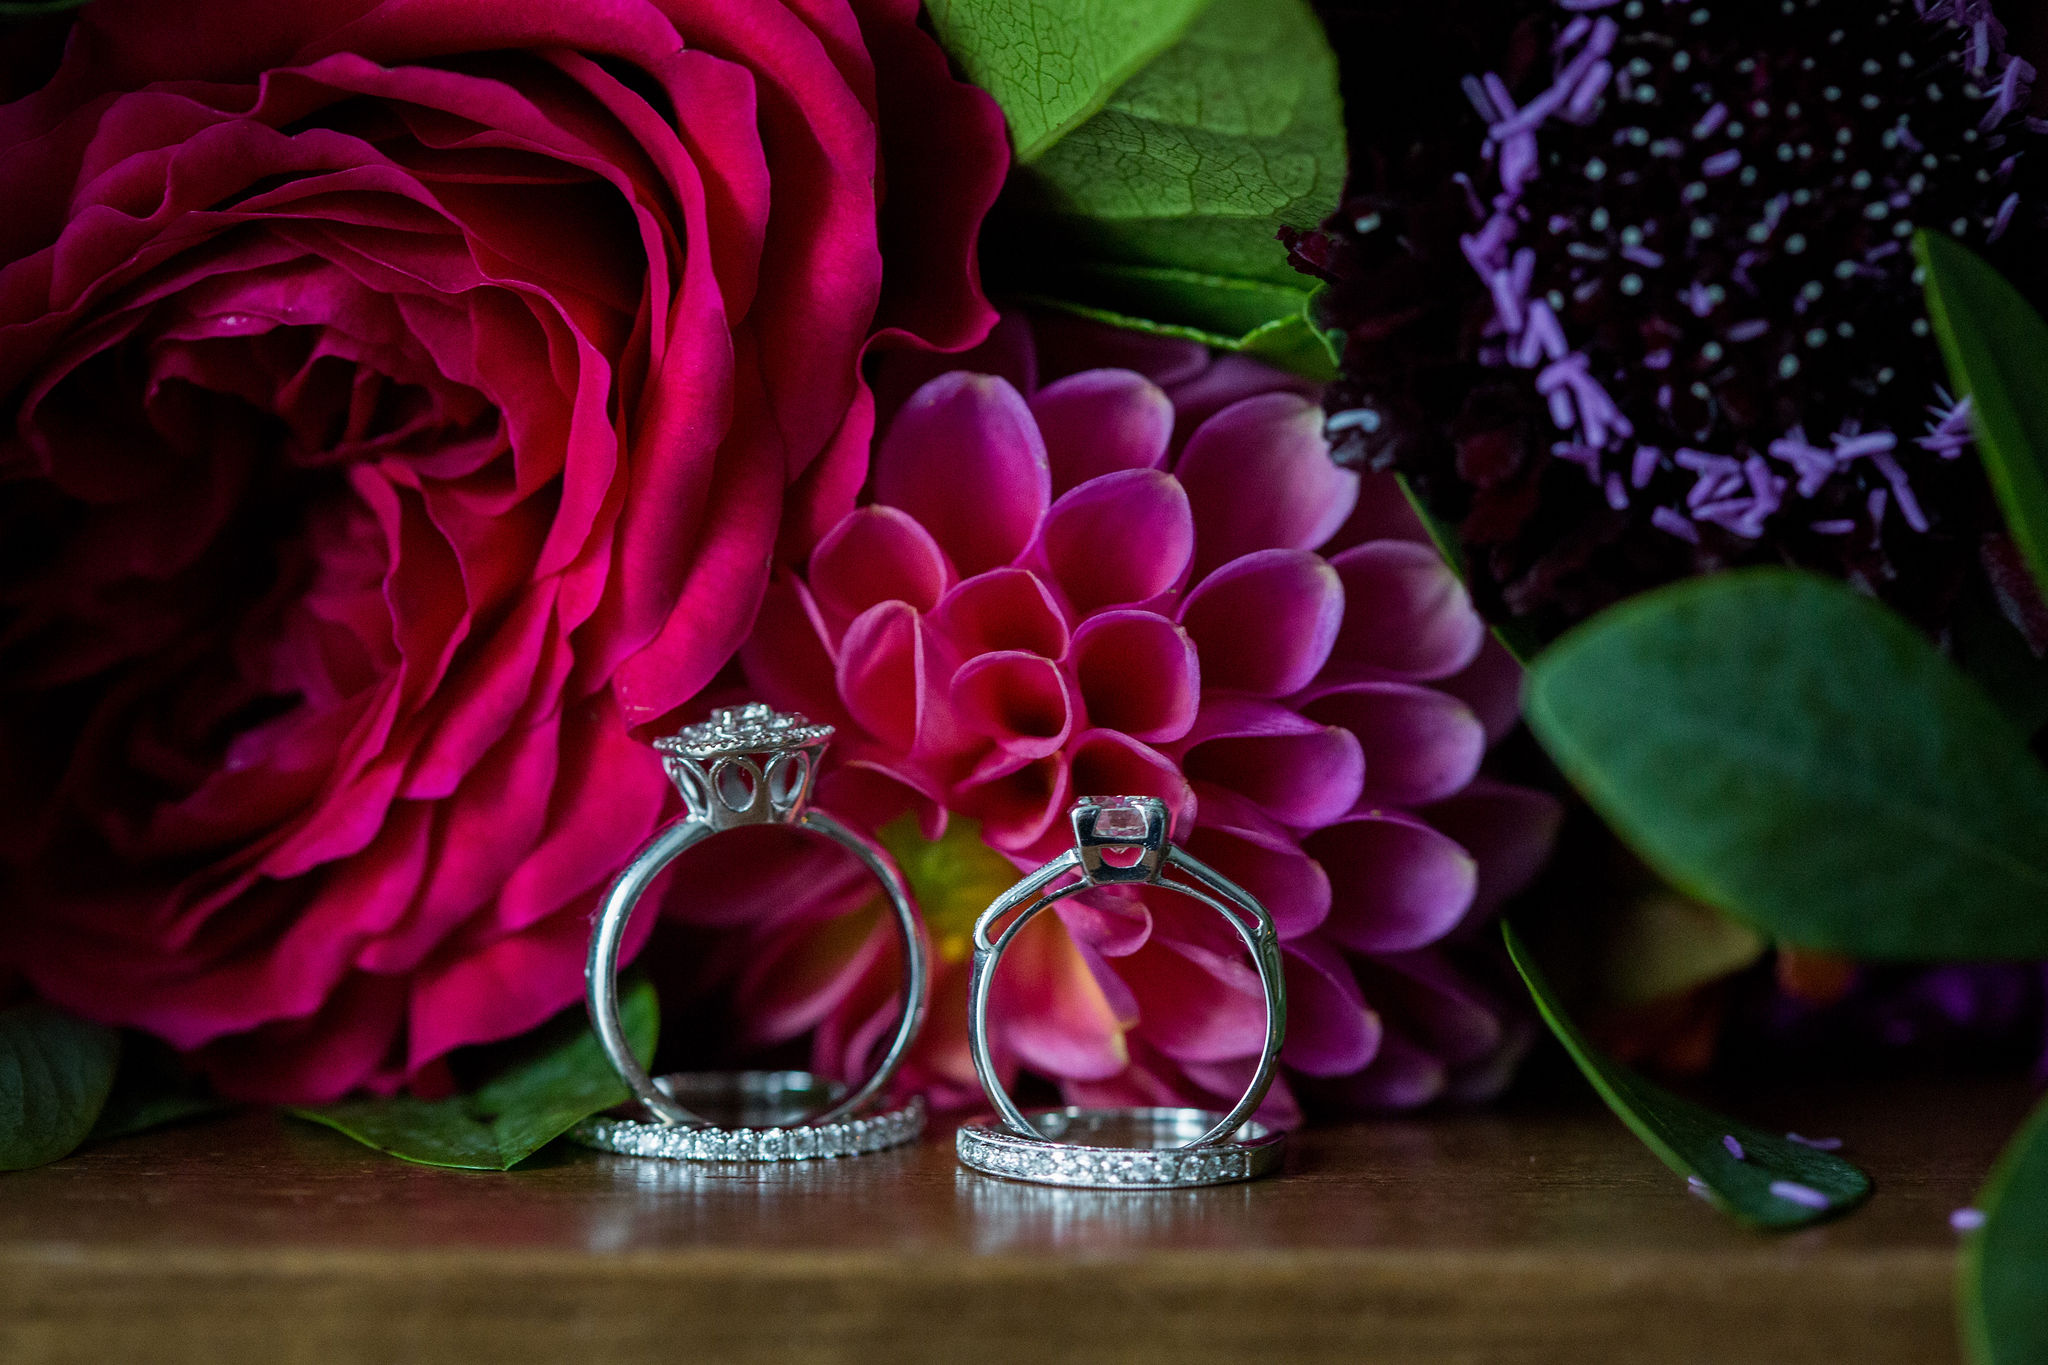 Bride wedding rings with magenta dahlias and garden roses for colorful summer wedding.